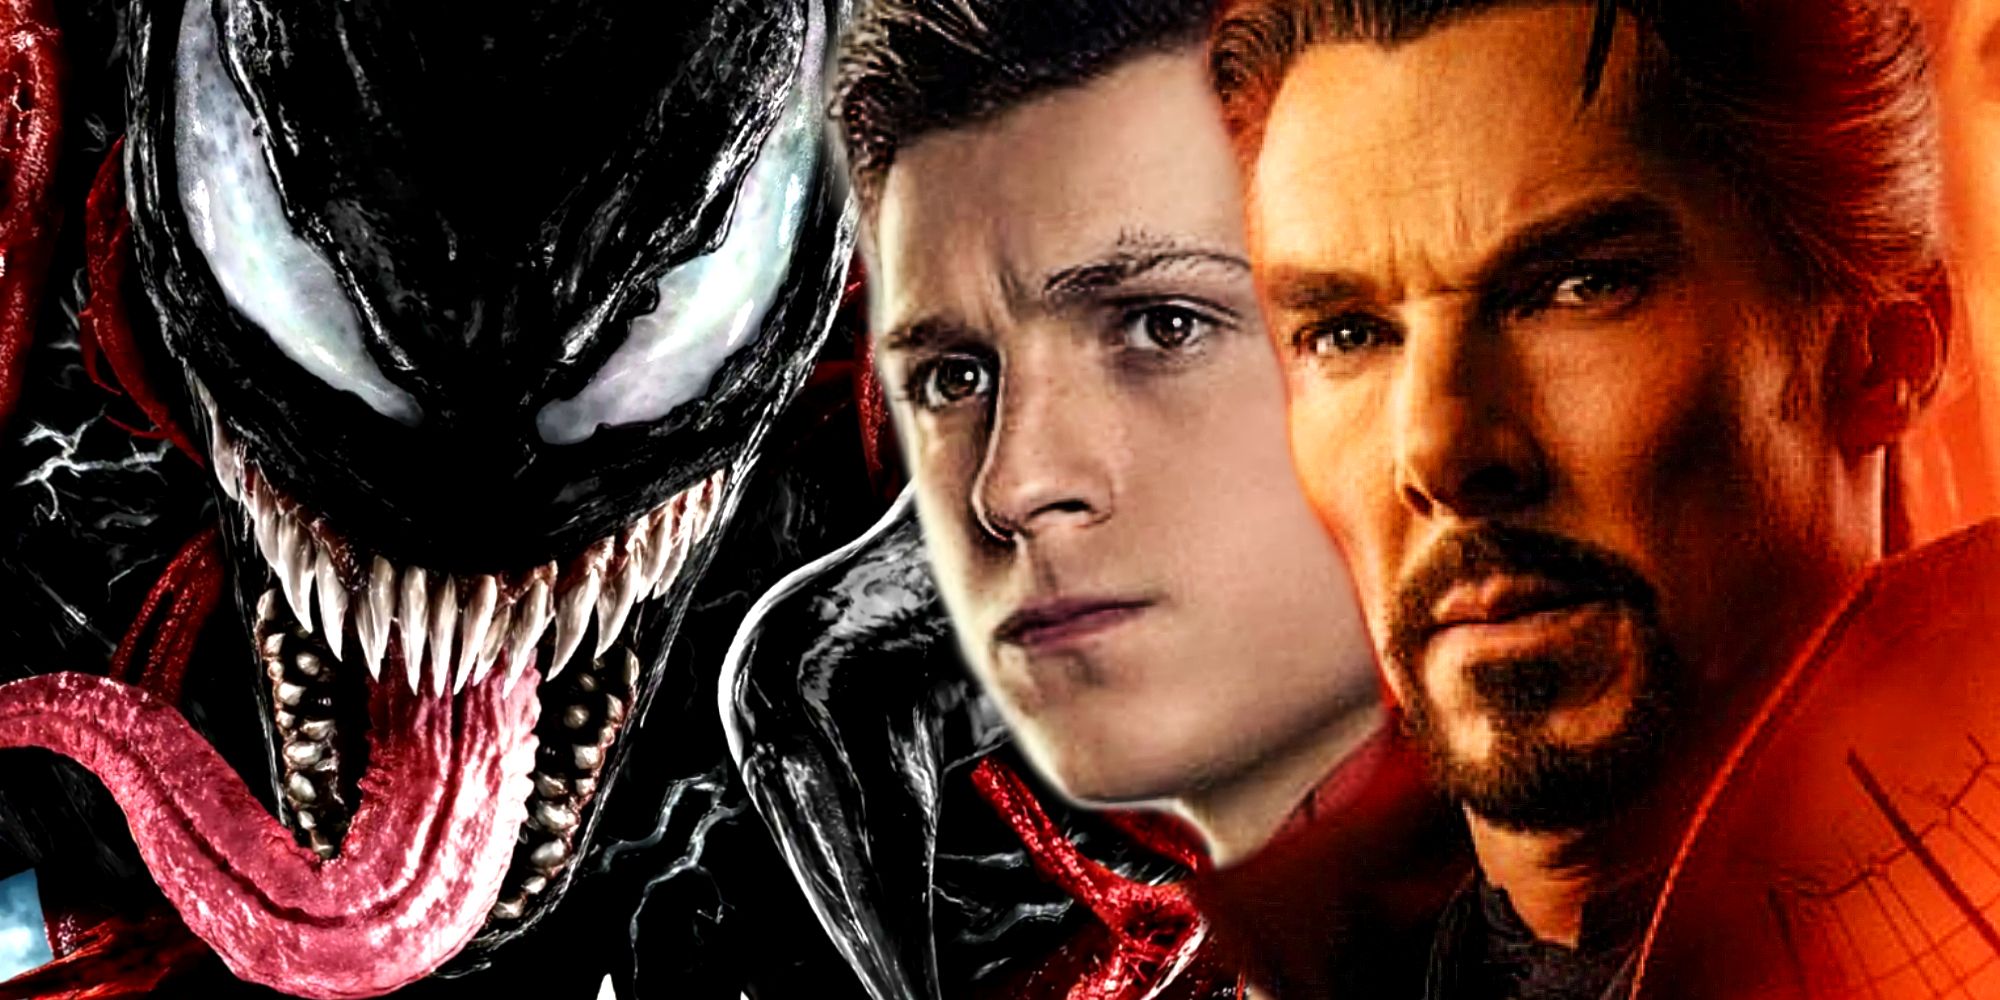 Venom 3 Is The End… So, What About Secret Wars & Spider-Man Crossovers?